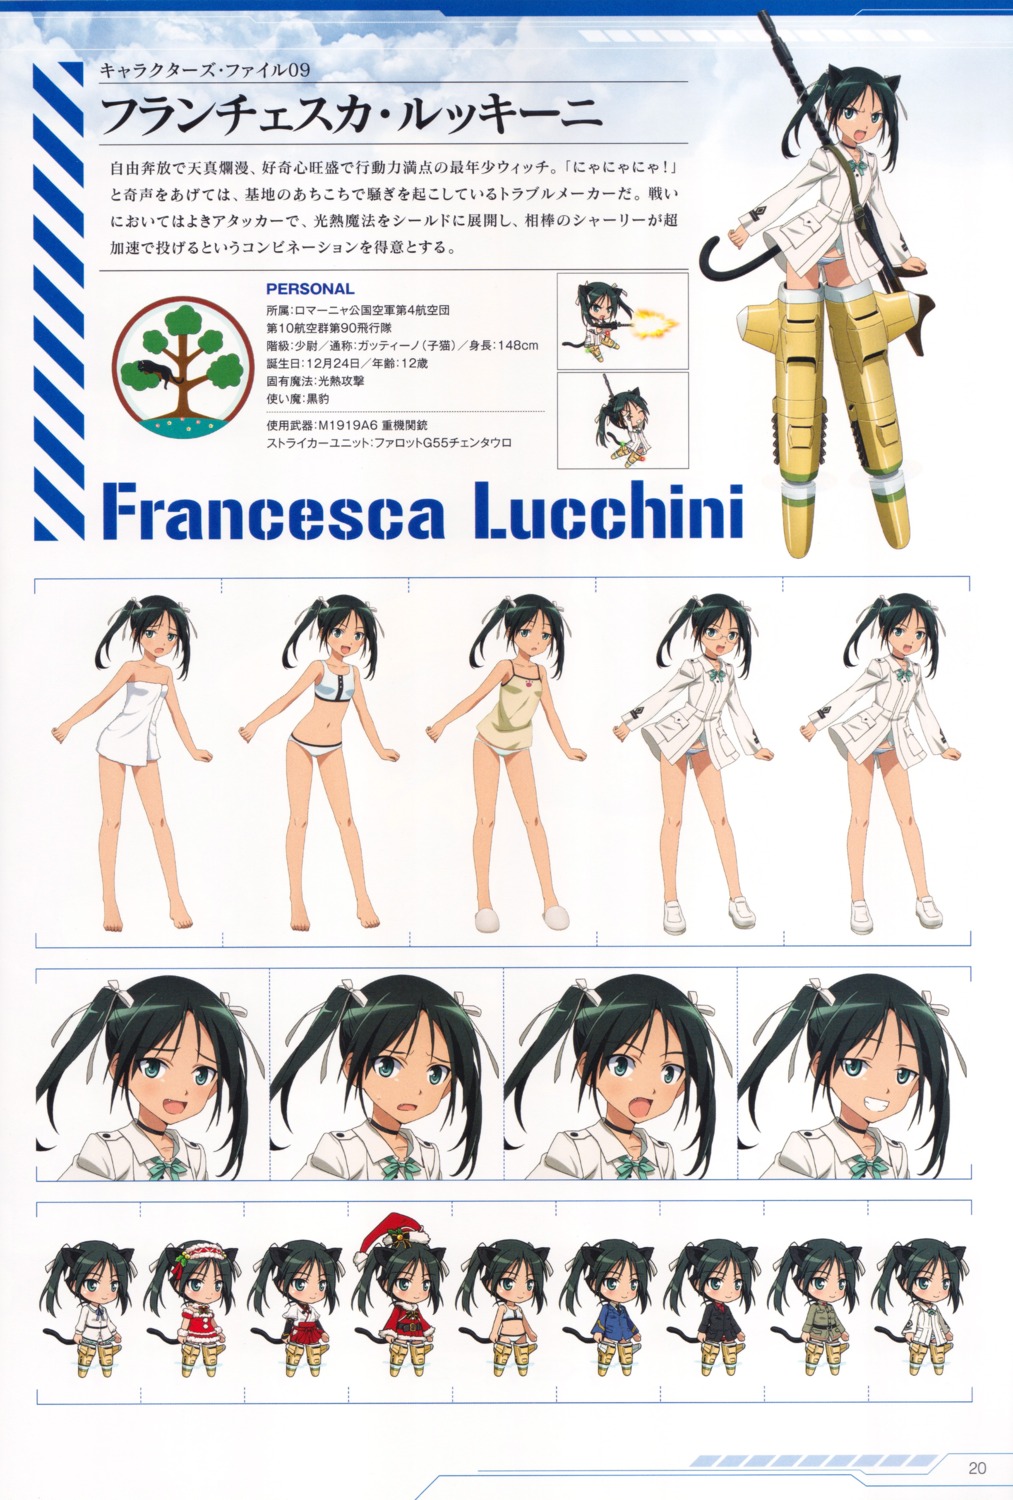 animal_ears character_design chibi christmas expression francesca_lucchini gun pantsu profile_page strike_witches swimsuits tagme tail uniform